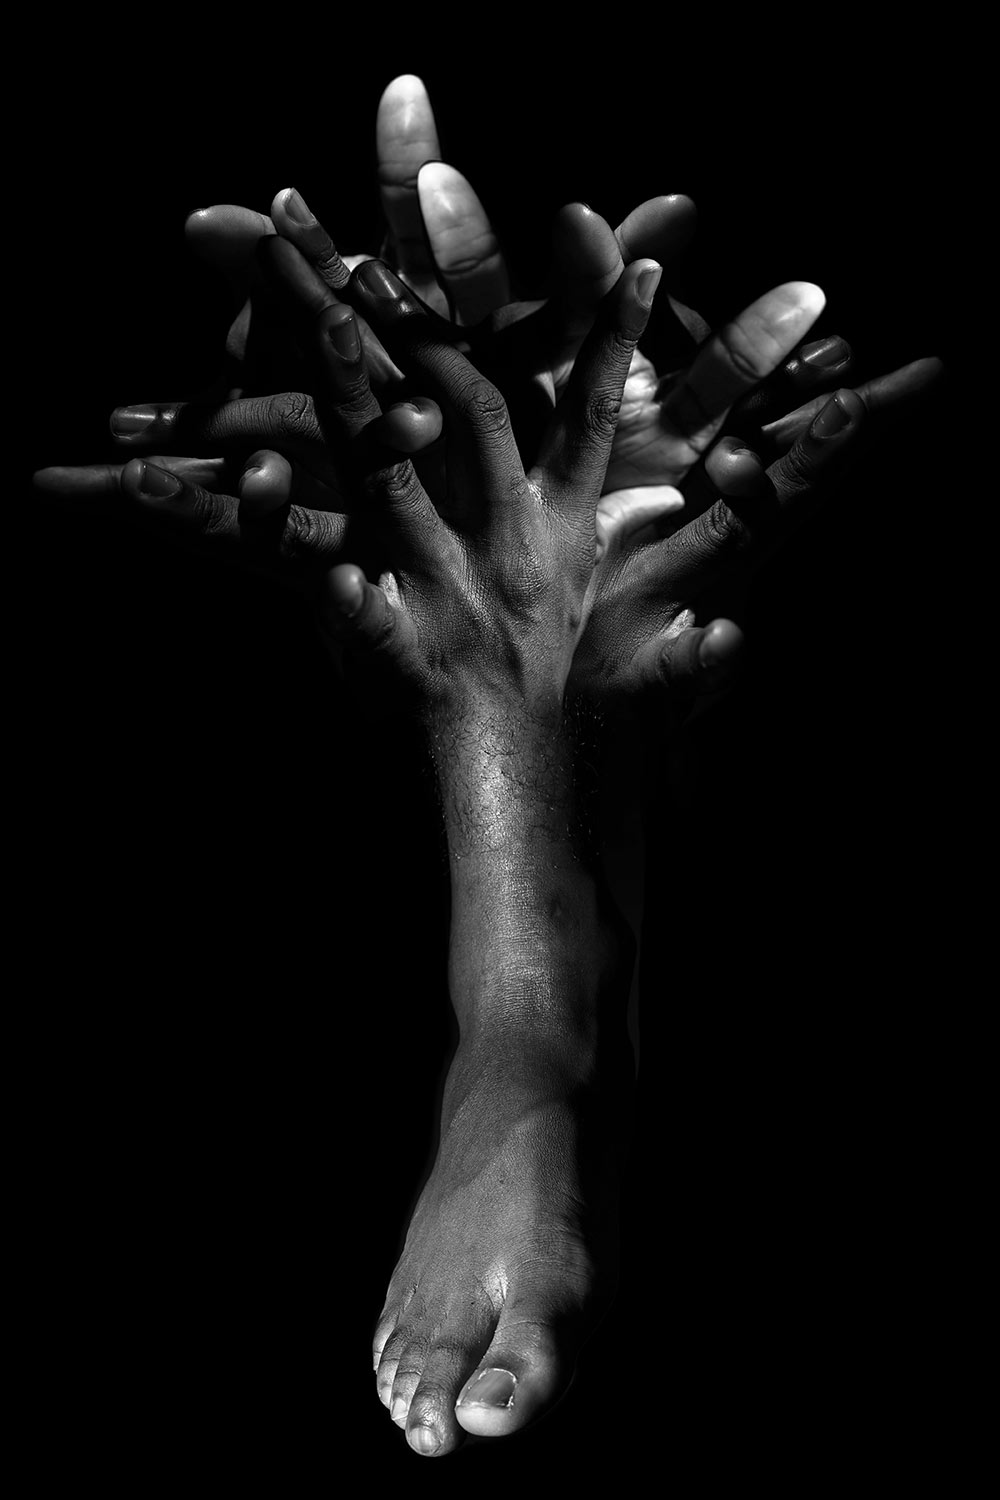 black and white image of hands and feet merged together to create a tree look